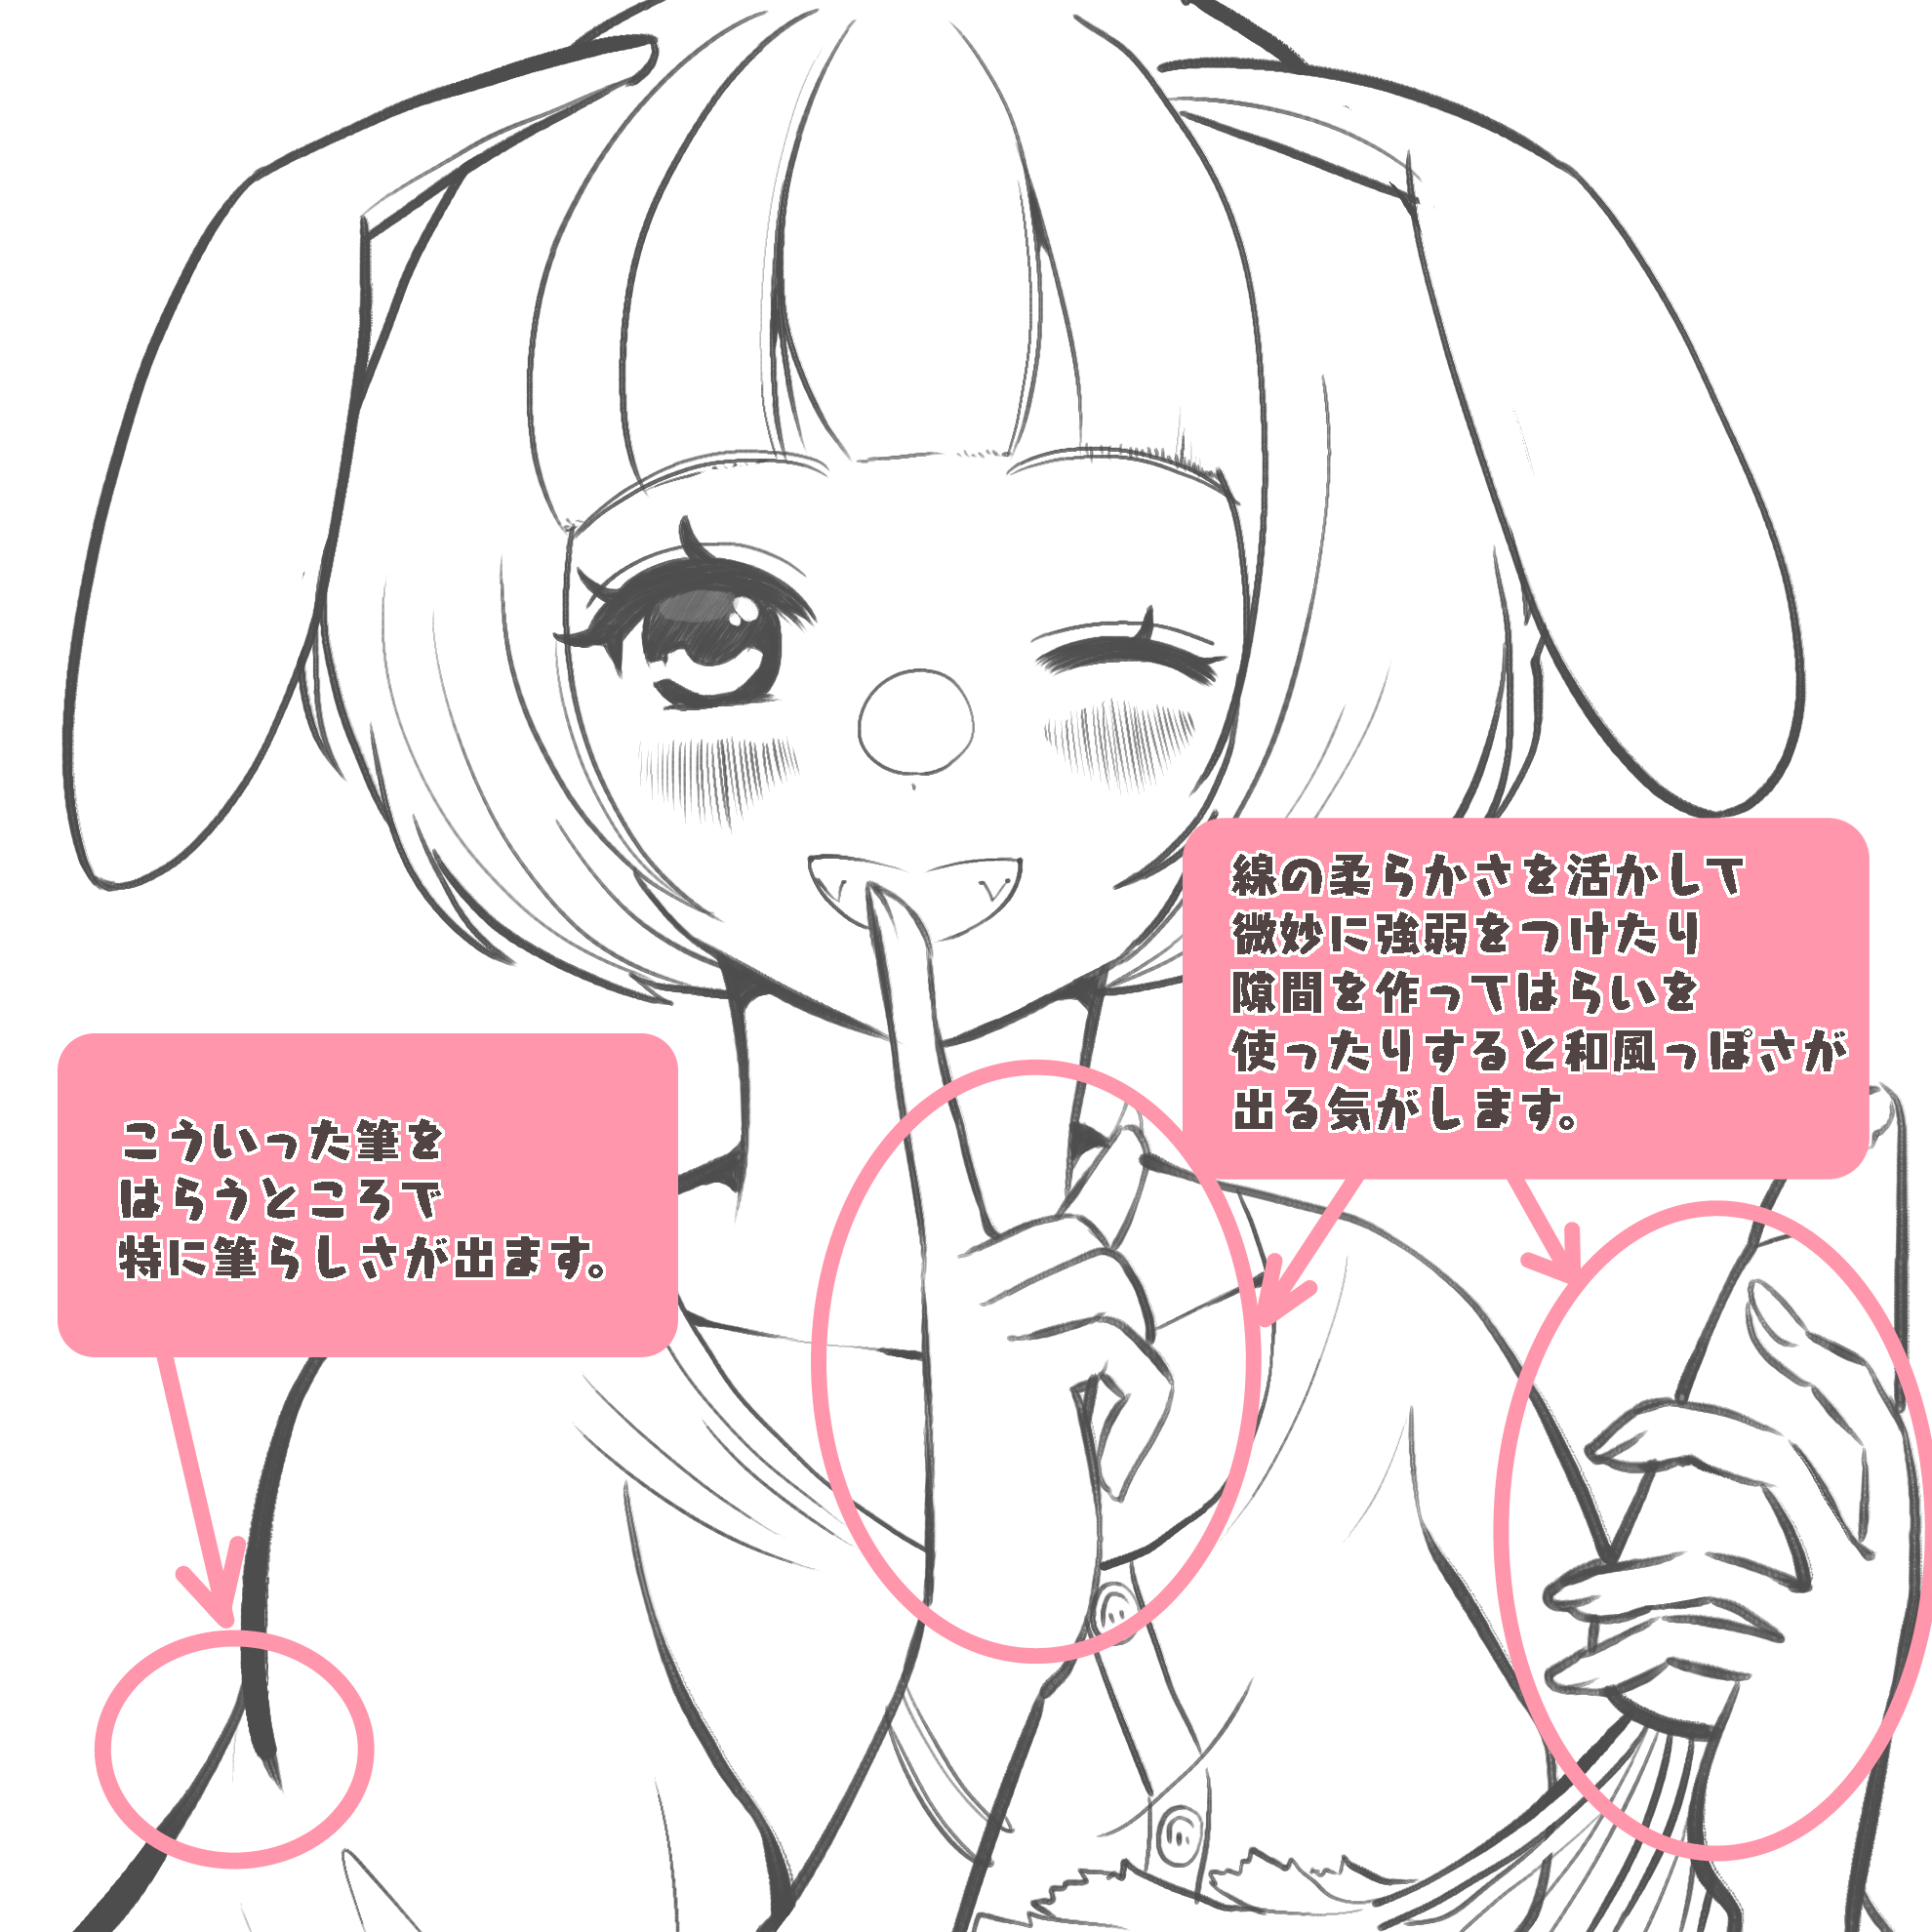 For beginners] Let's try drawing line art (3) Brushes change! Atmosphere of  Illustration [For Smartphones]